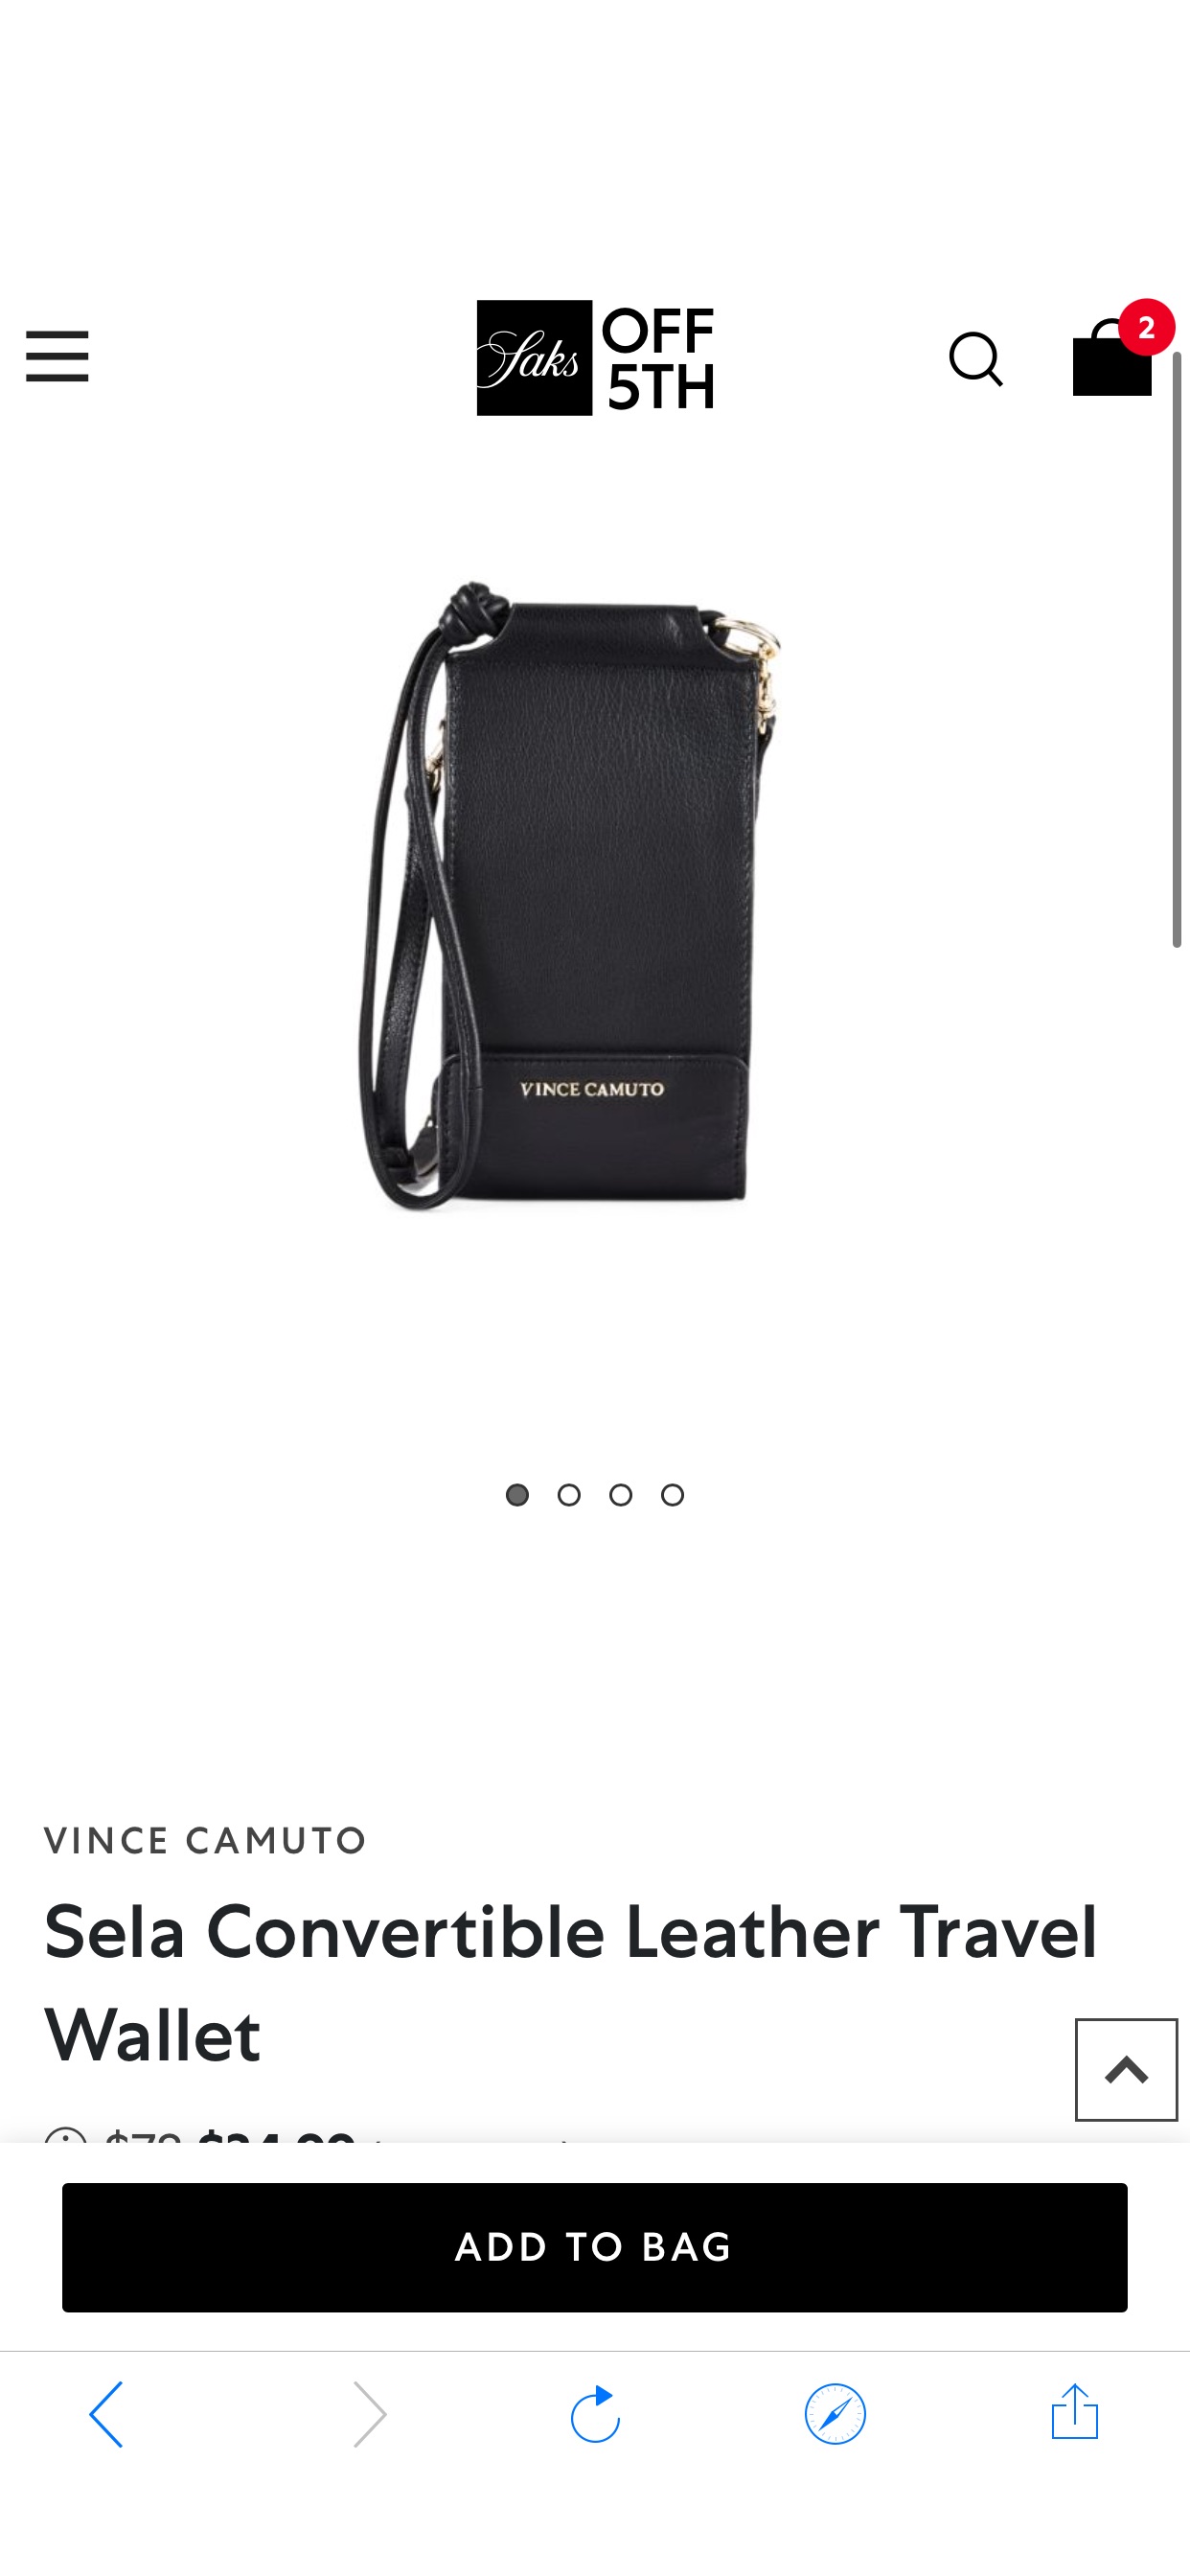 Vince Camuto Sela Convertible Leather Travel Wallet on SALE | Saks OFF 5TH
包包